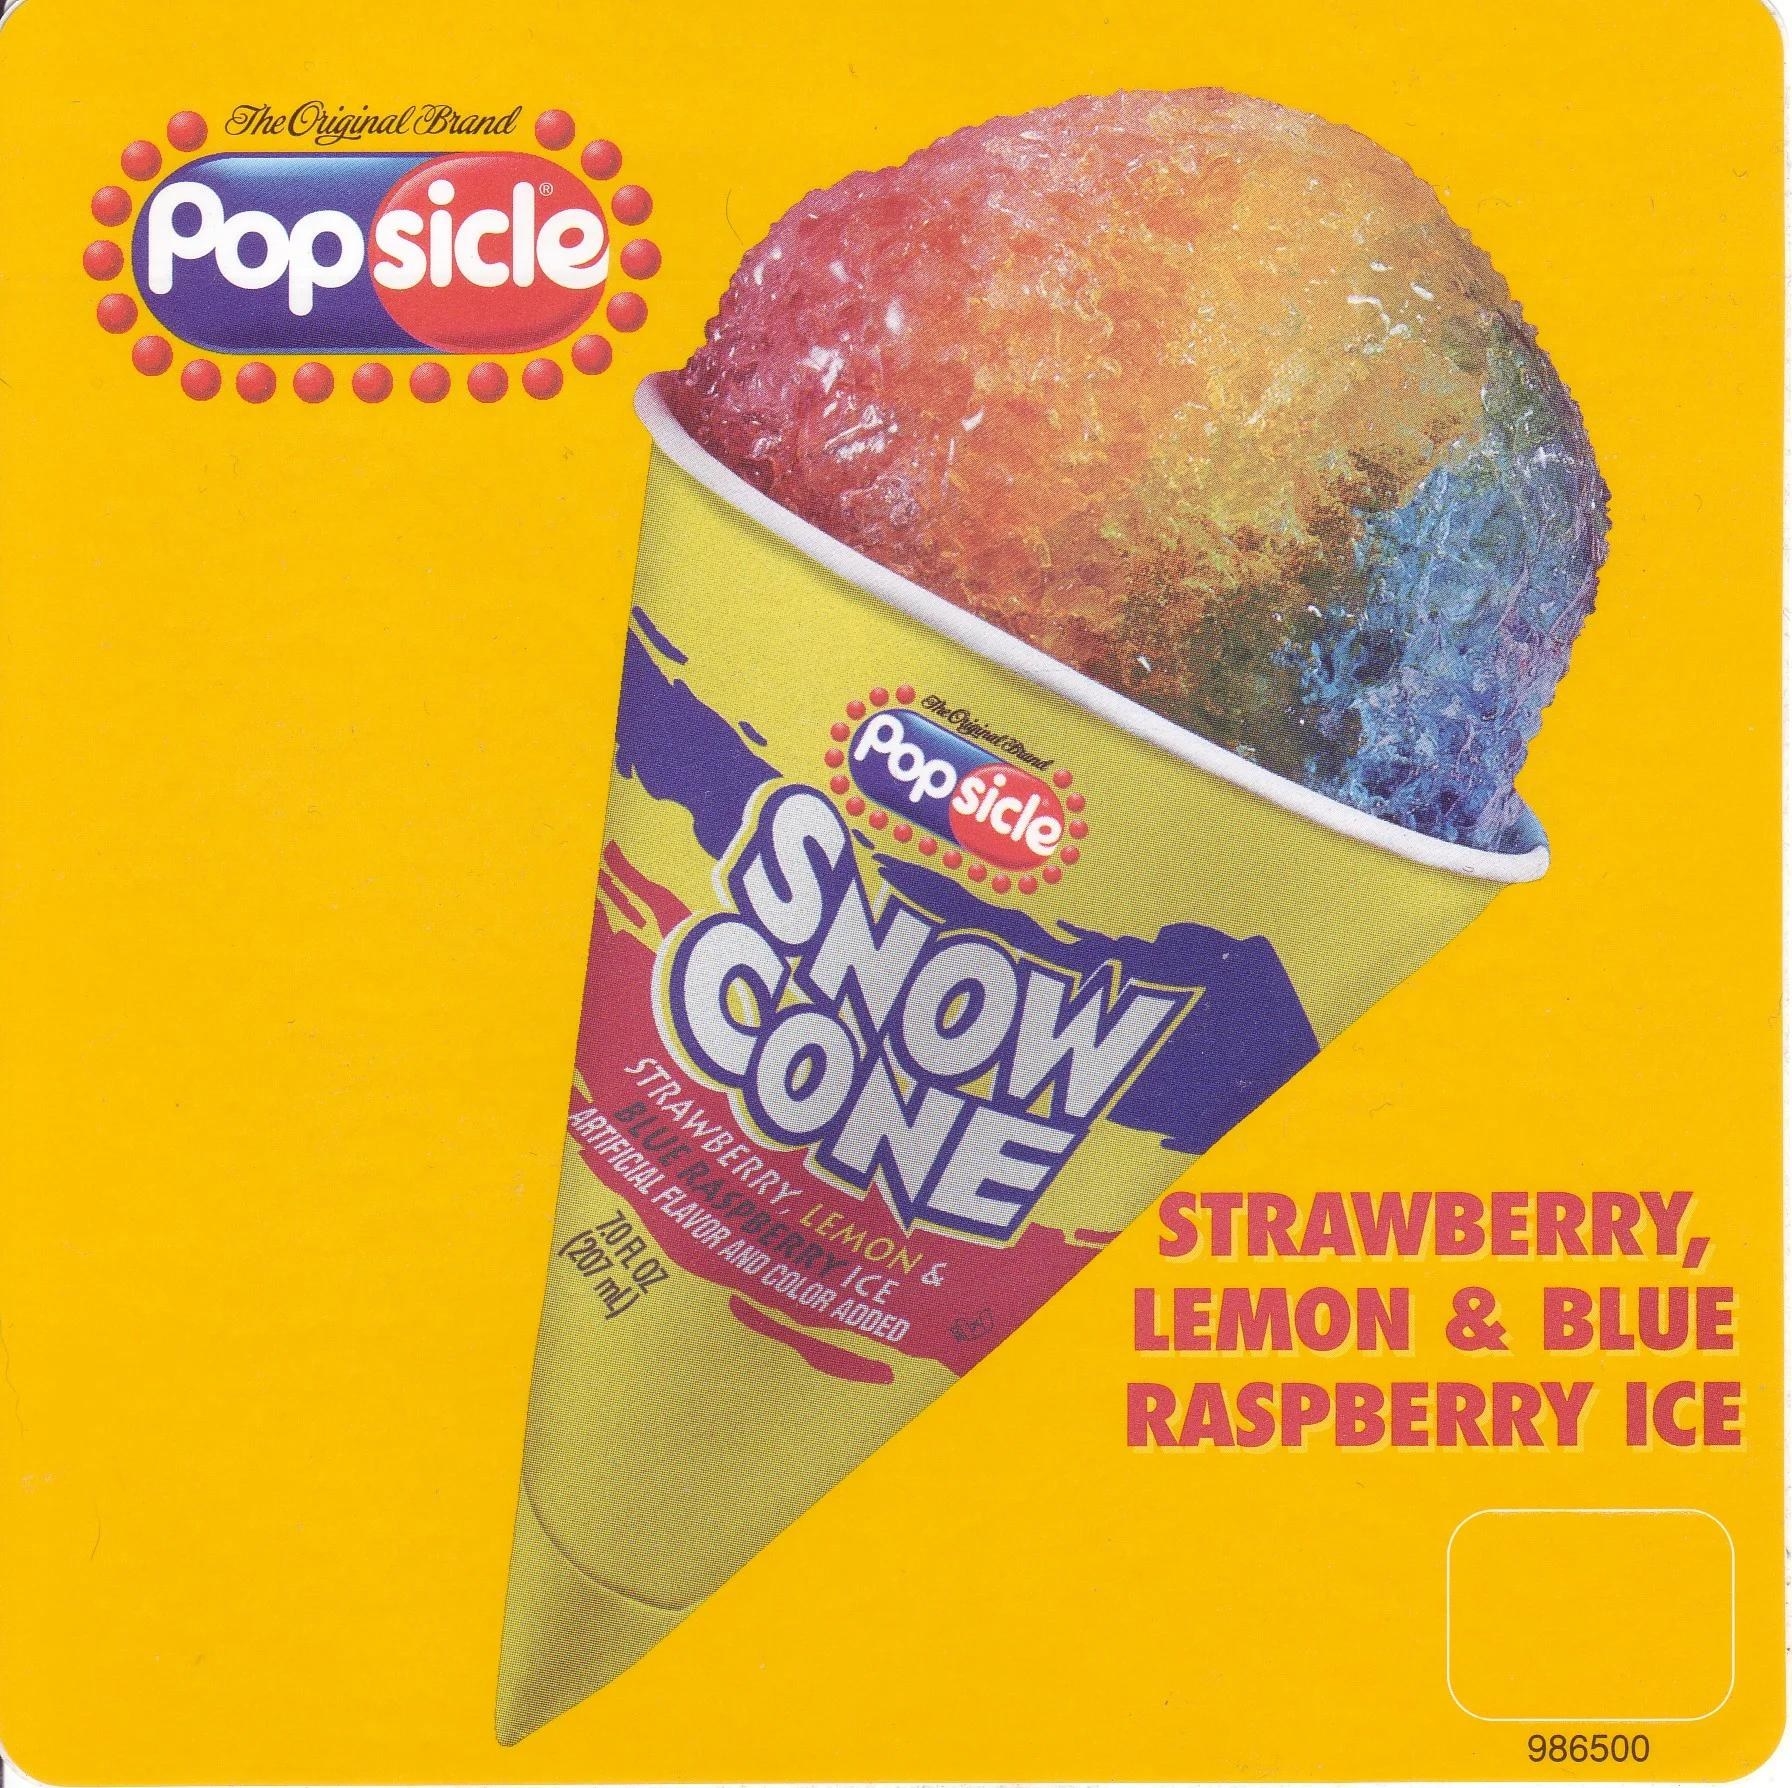 An advertisement for Popsicle&#x27;s rainbow snow cones